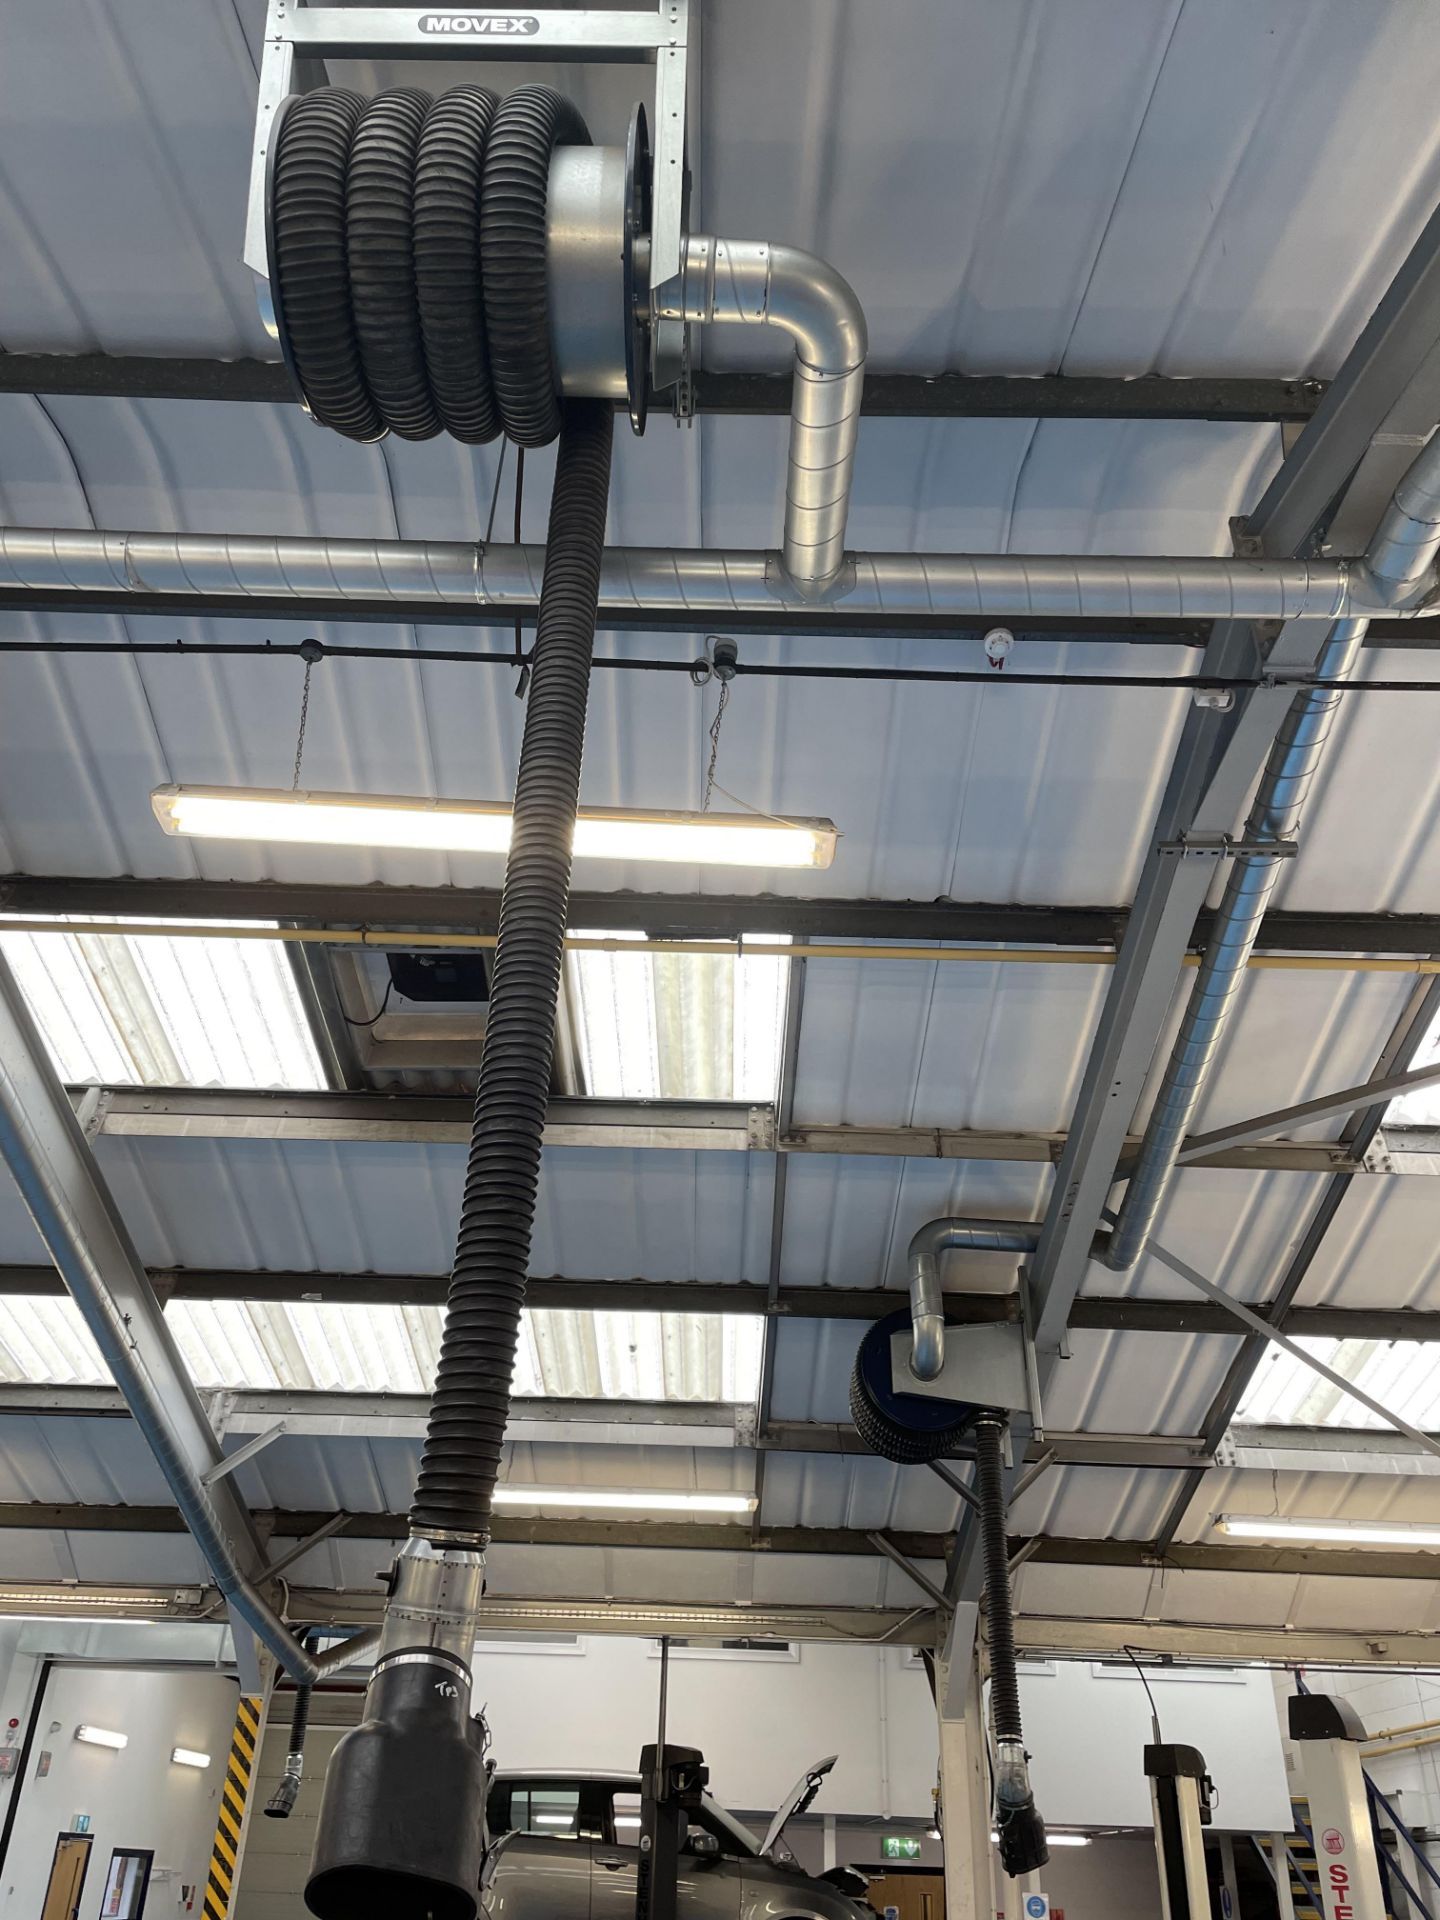 The Workshop Exhaust Extraction System Comprising 4 Recoil Extraction Hoses with Trunking & Movex - Image 2 of 5